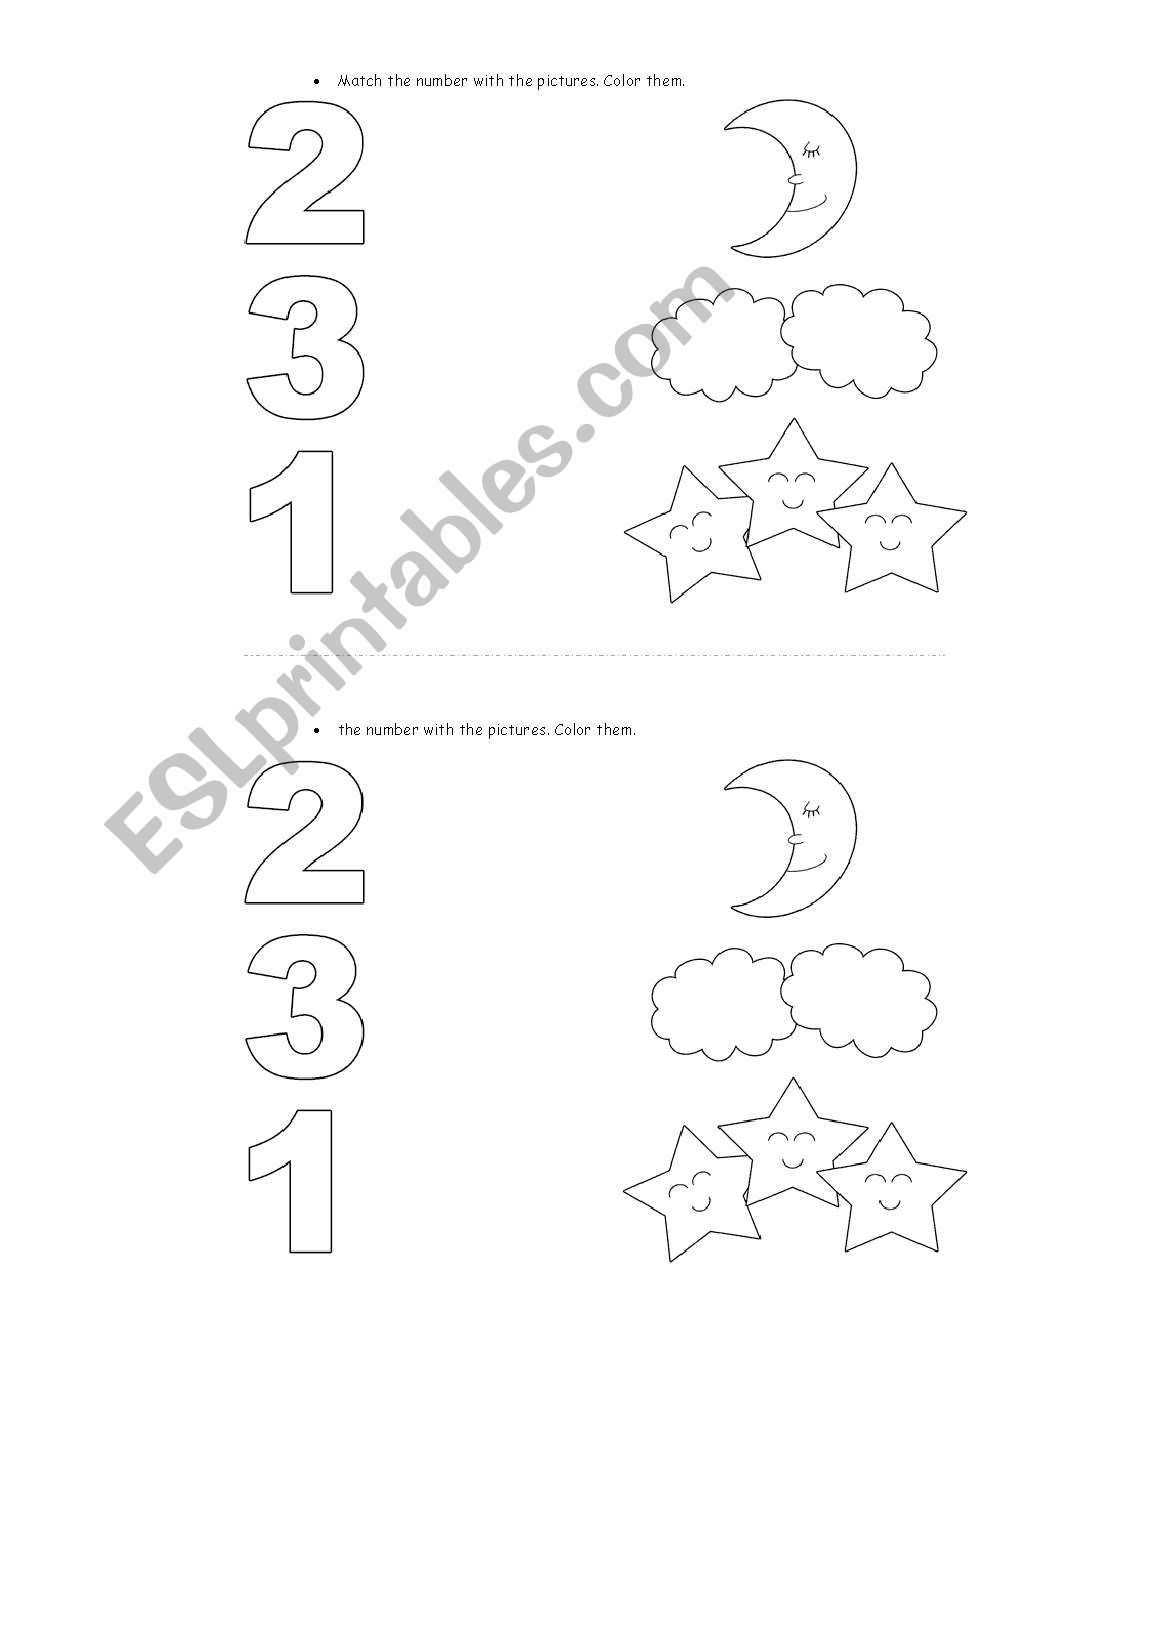 Match the Numbers worksheet